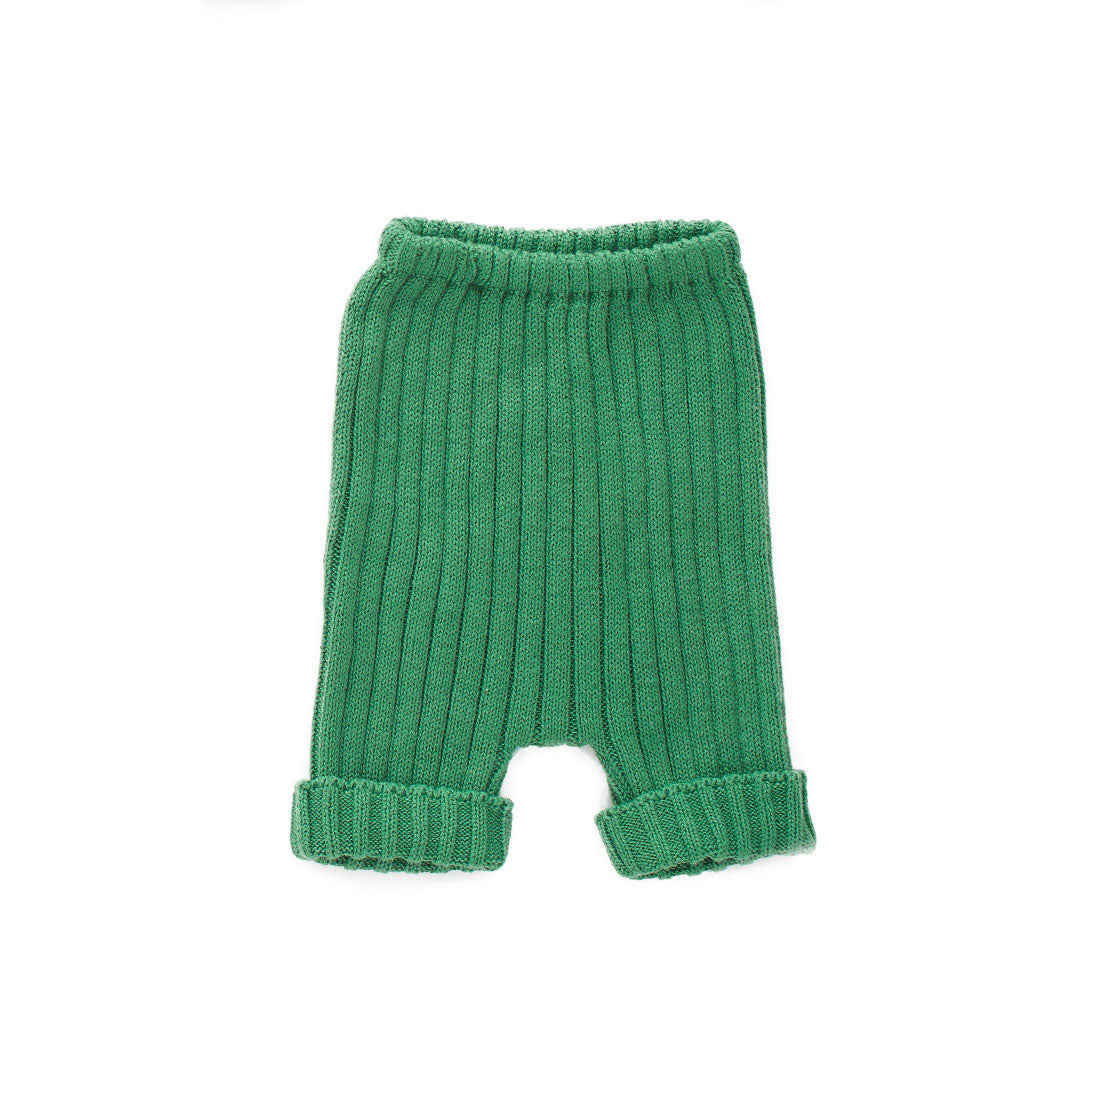 Oeuf Green Everyday Shorts